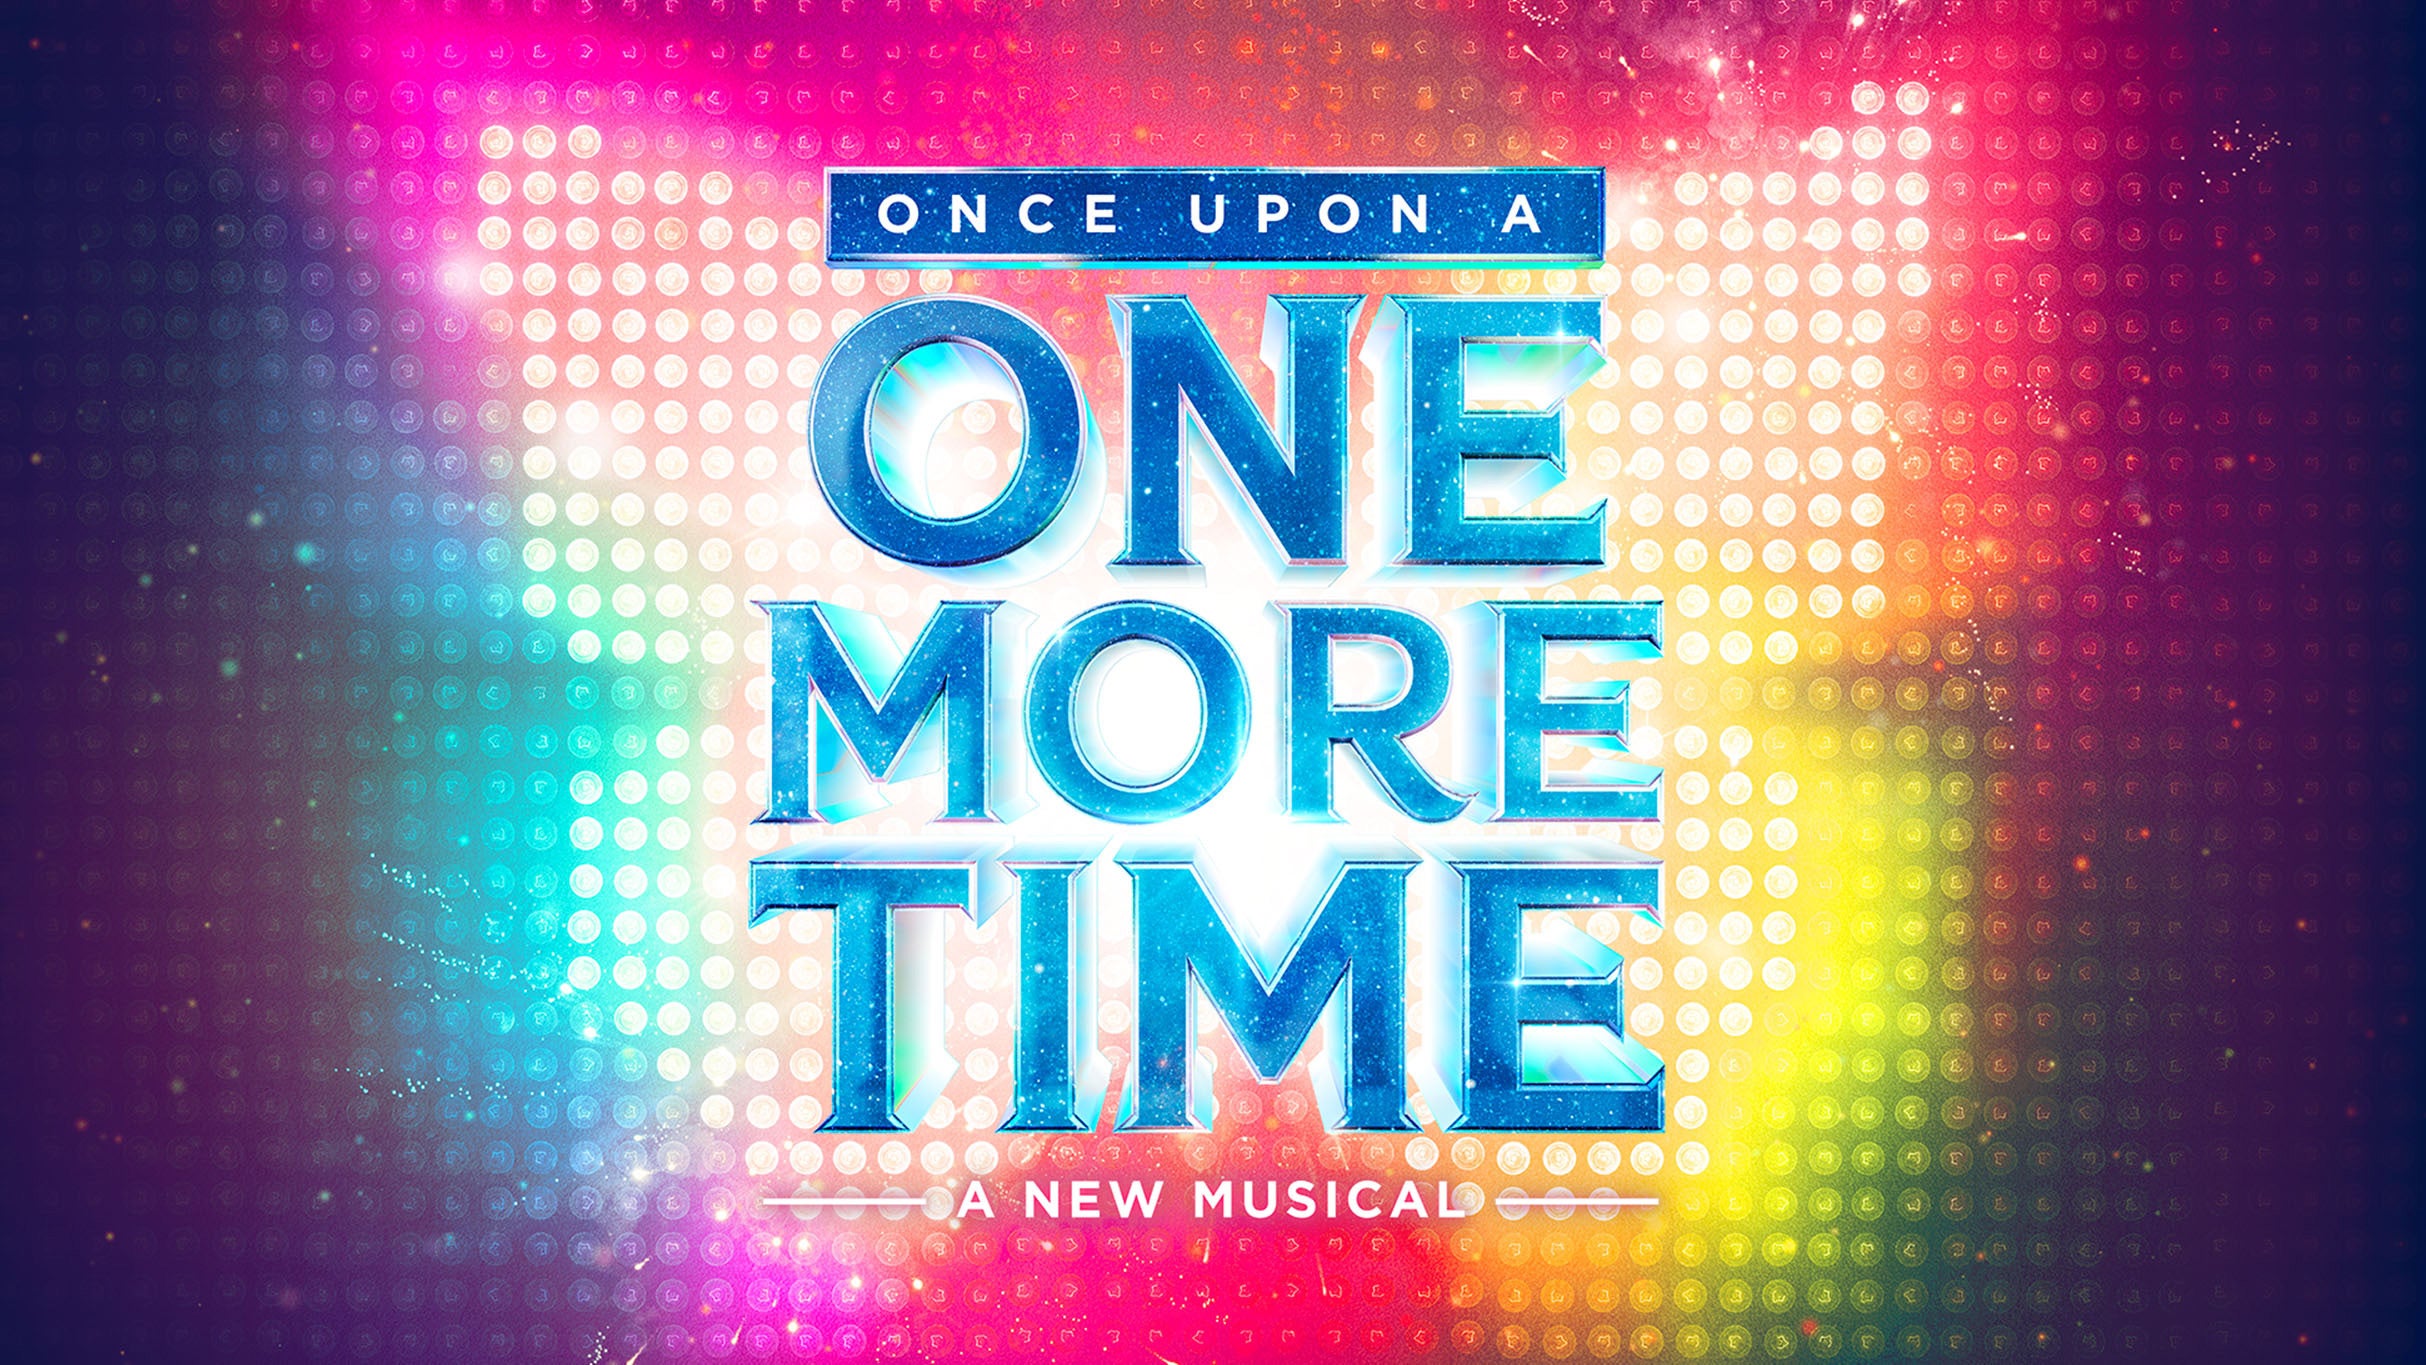 Once Upon A One More Time (NY)